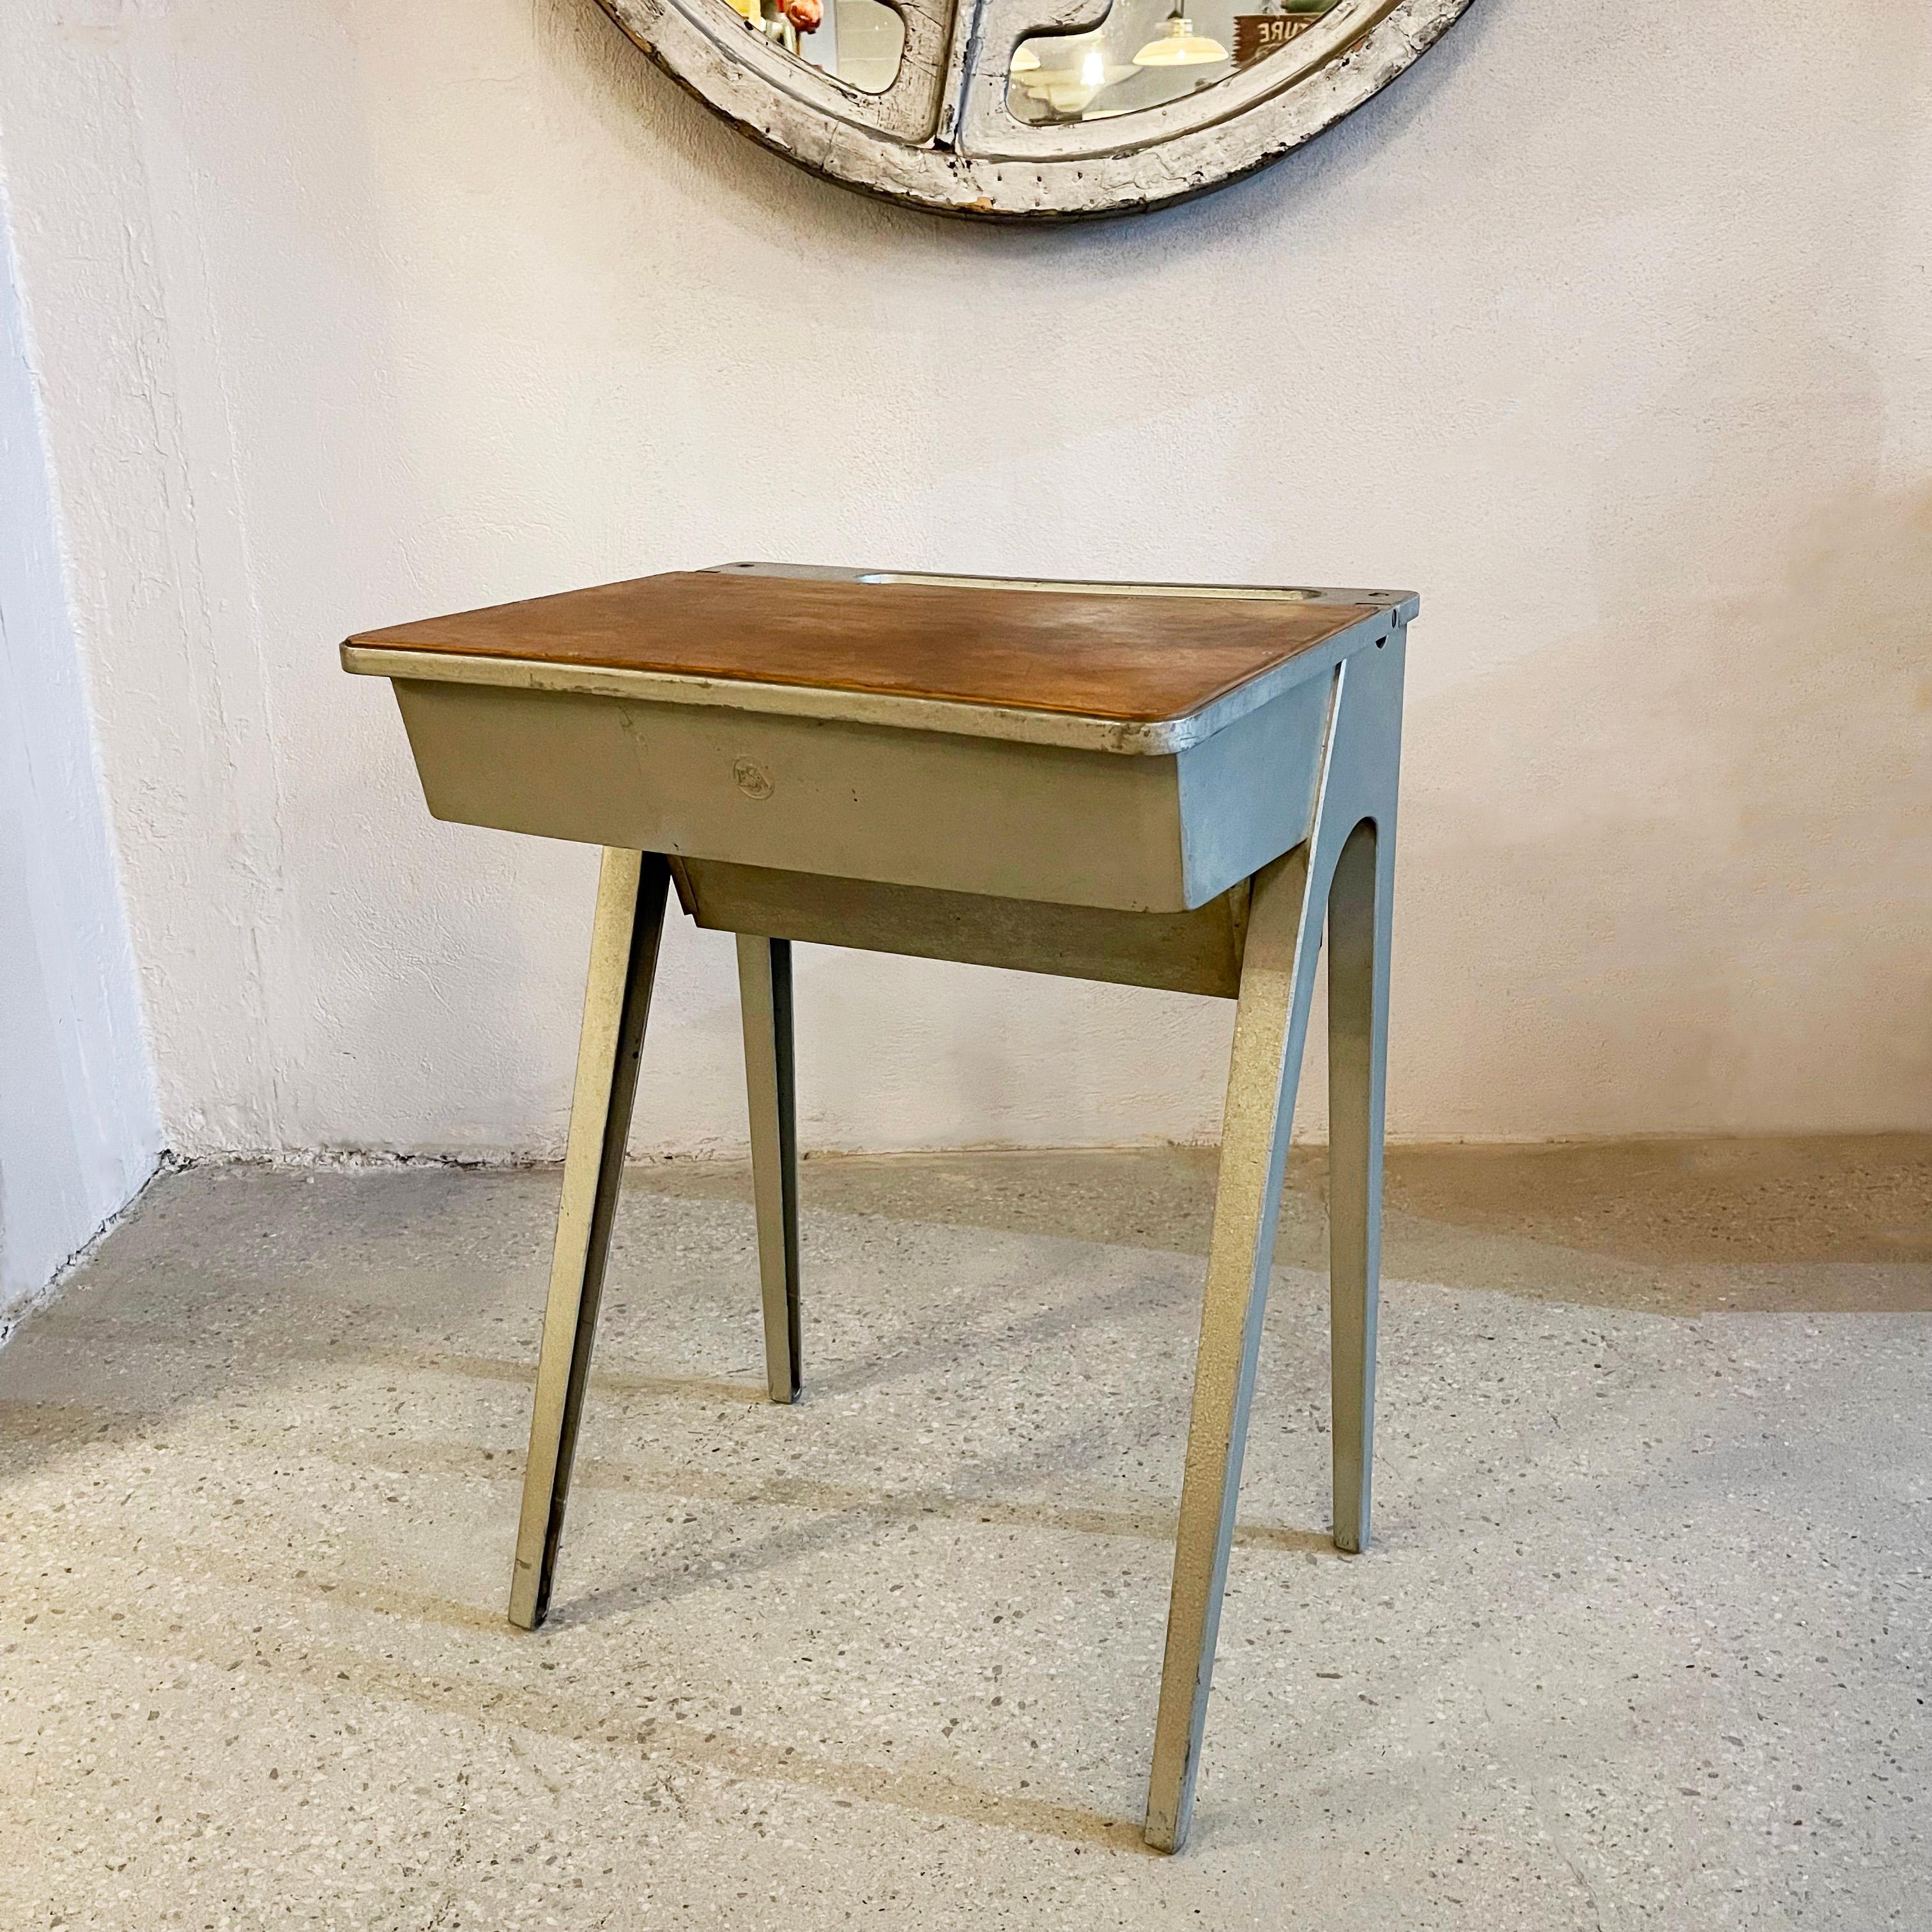 Rare, mid-Century Modern, birch veneer and cast aluminum school desk designed by English designer James W. Leonard features a flip top with interior storage. Manufactured by the Education Supply Association (Esavian Ltd), with the ESA mark cast on